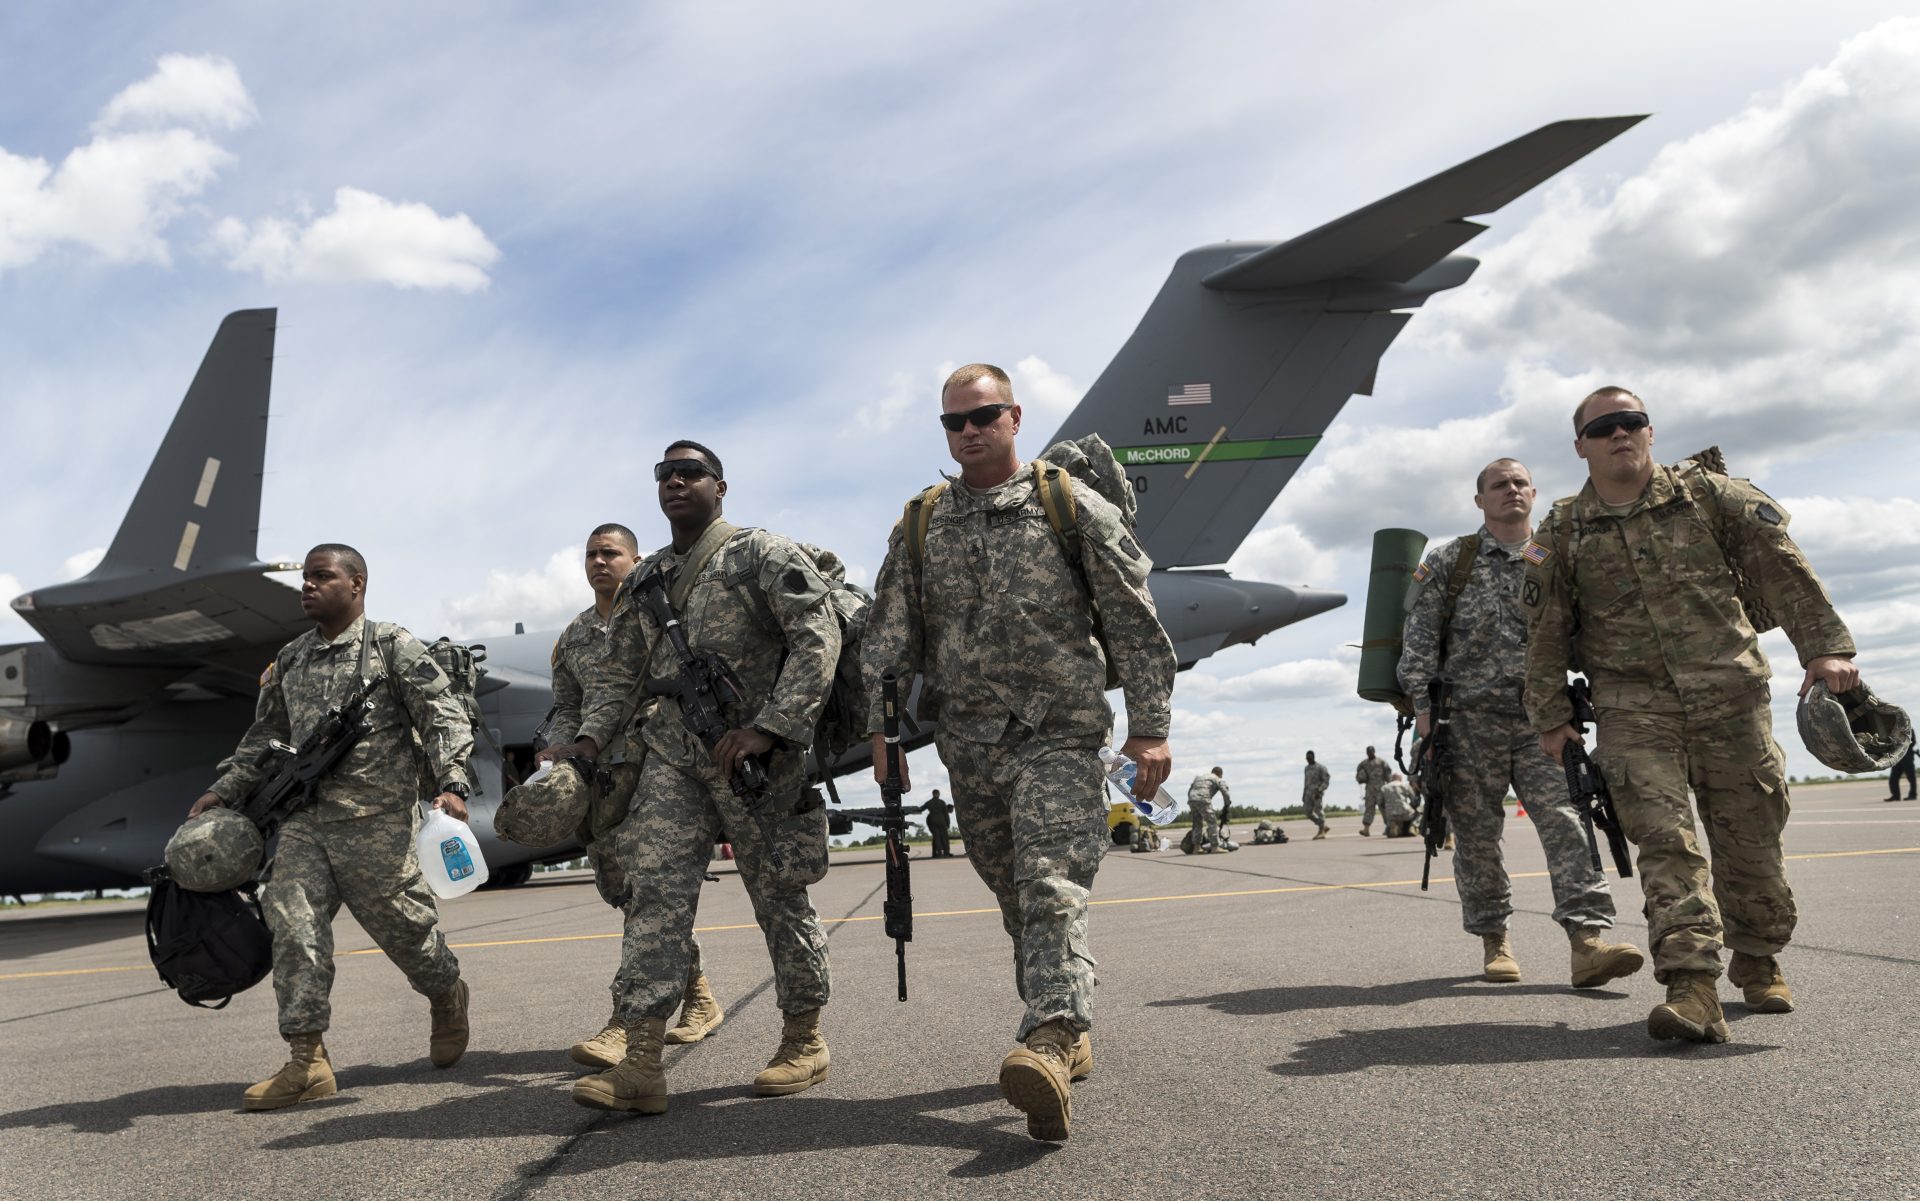 Members of the U.S. Army of the Pennsylvania National Guard arrival by plane at a airport in Vilnius, Lithuania, Sunday, June 5, 2016. US troops arrived Sunday in Lithuania to participate in NATO maneuvers.